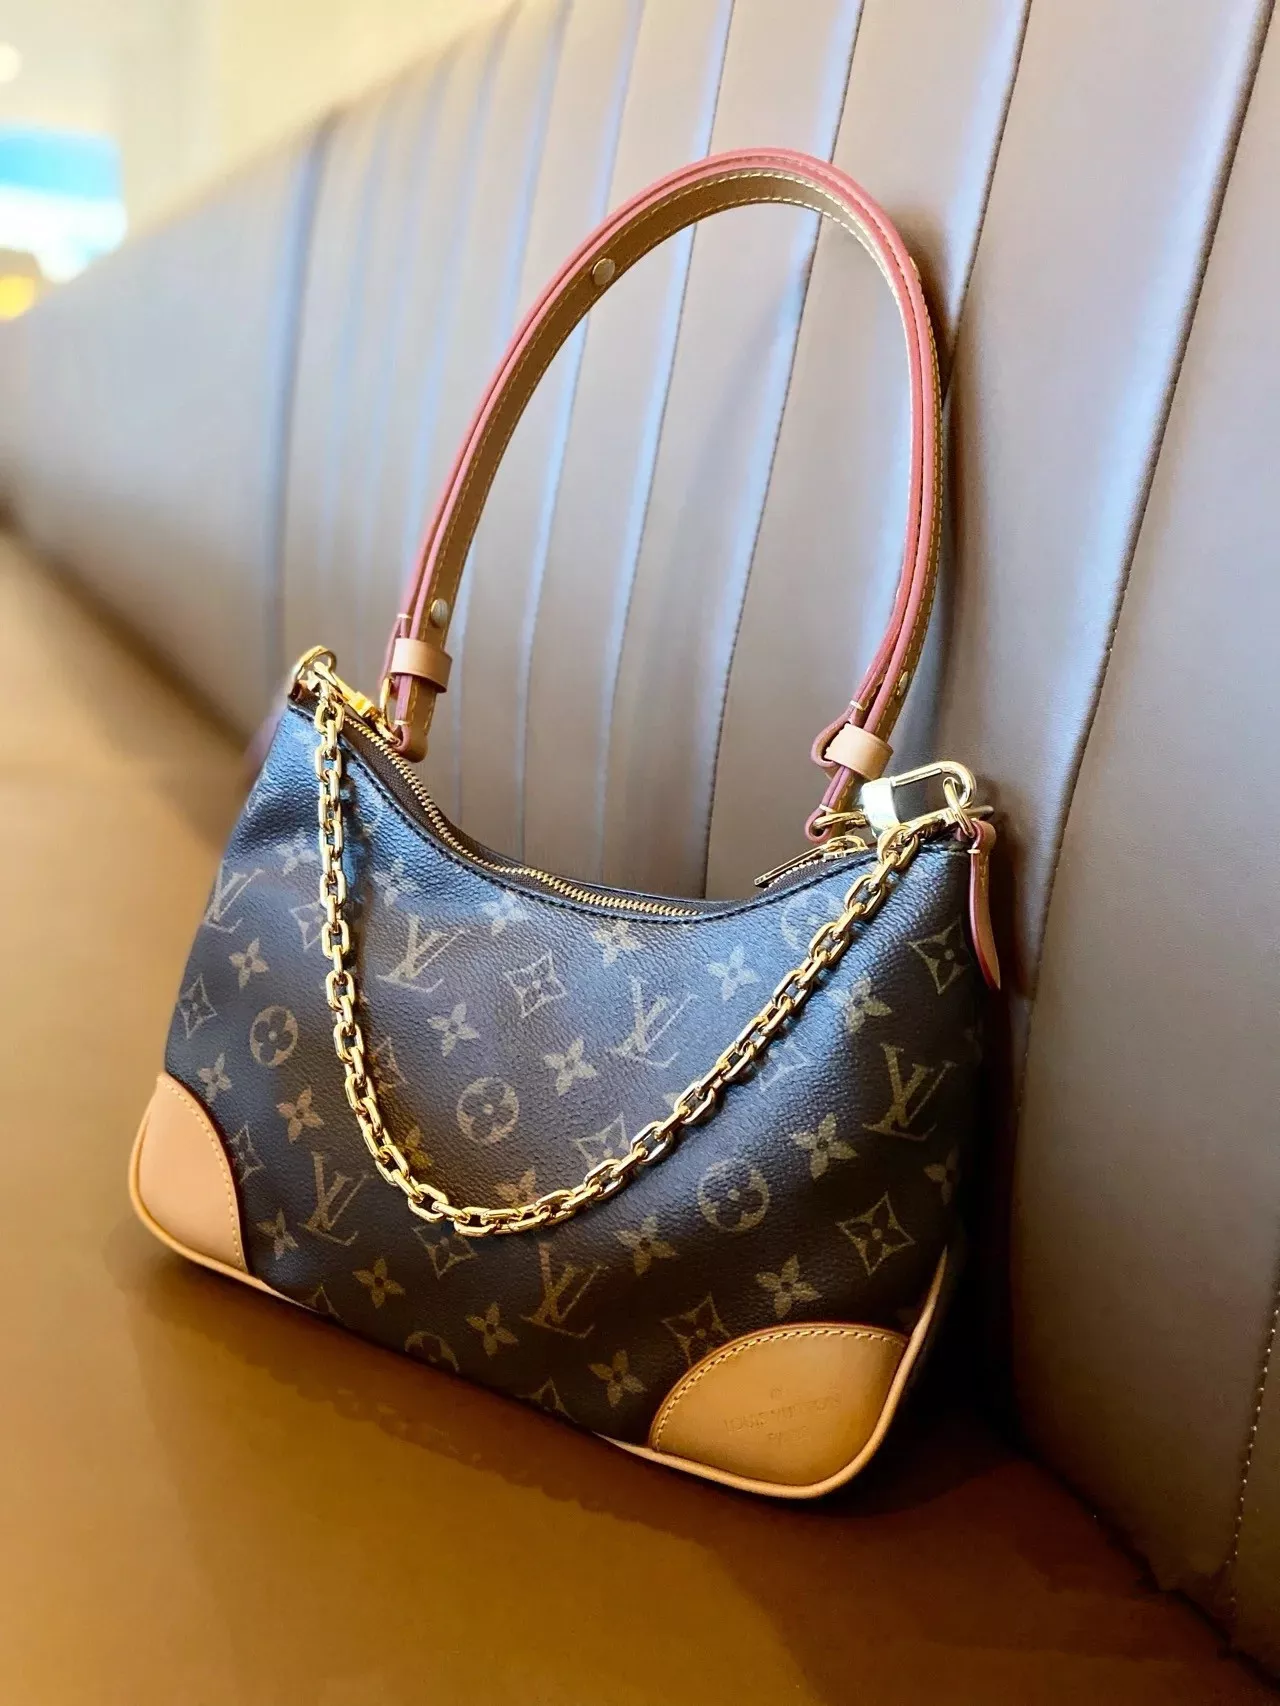 Louis Vuitton Boulogne 💫, Gallery posted by Sifat Zavfo